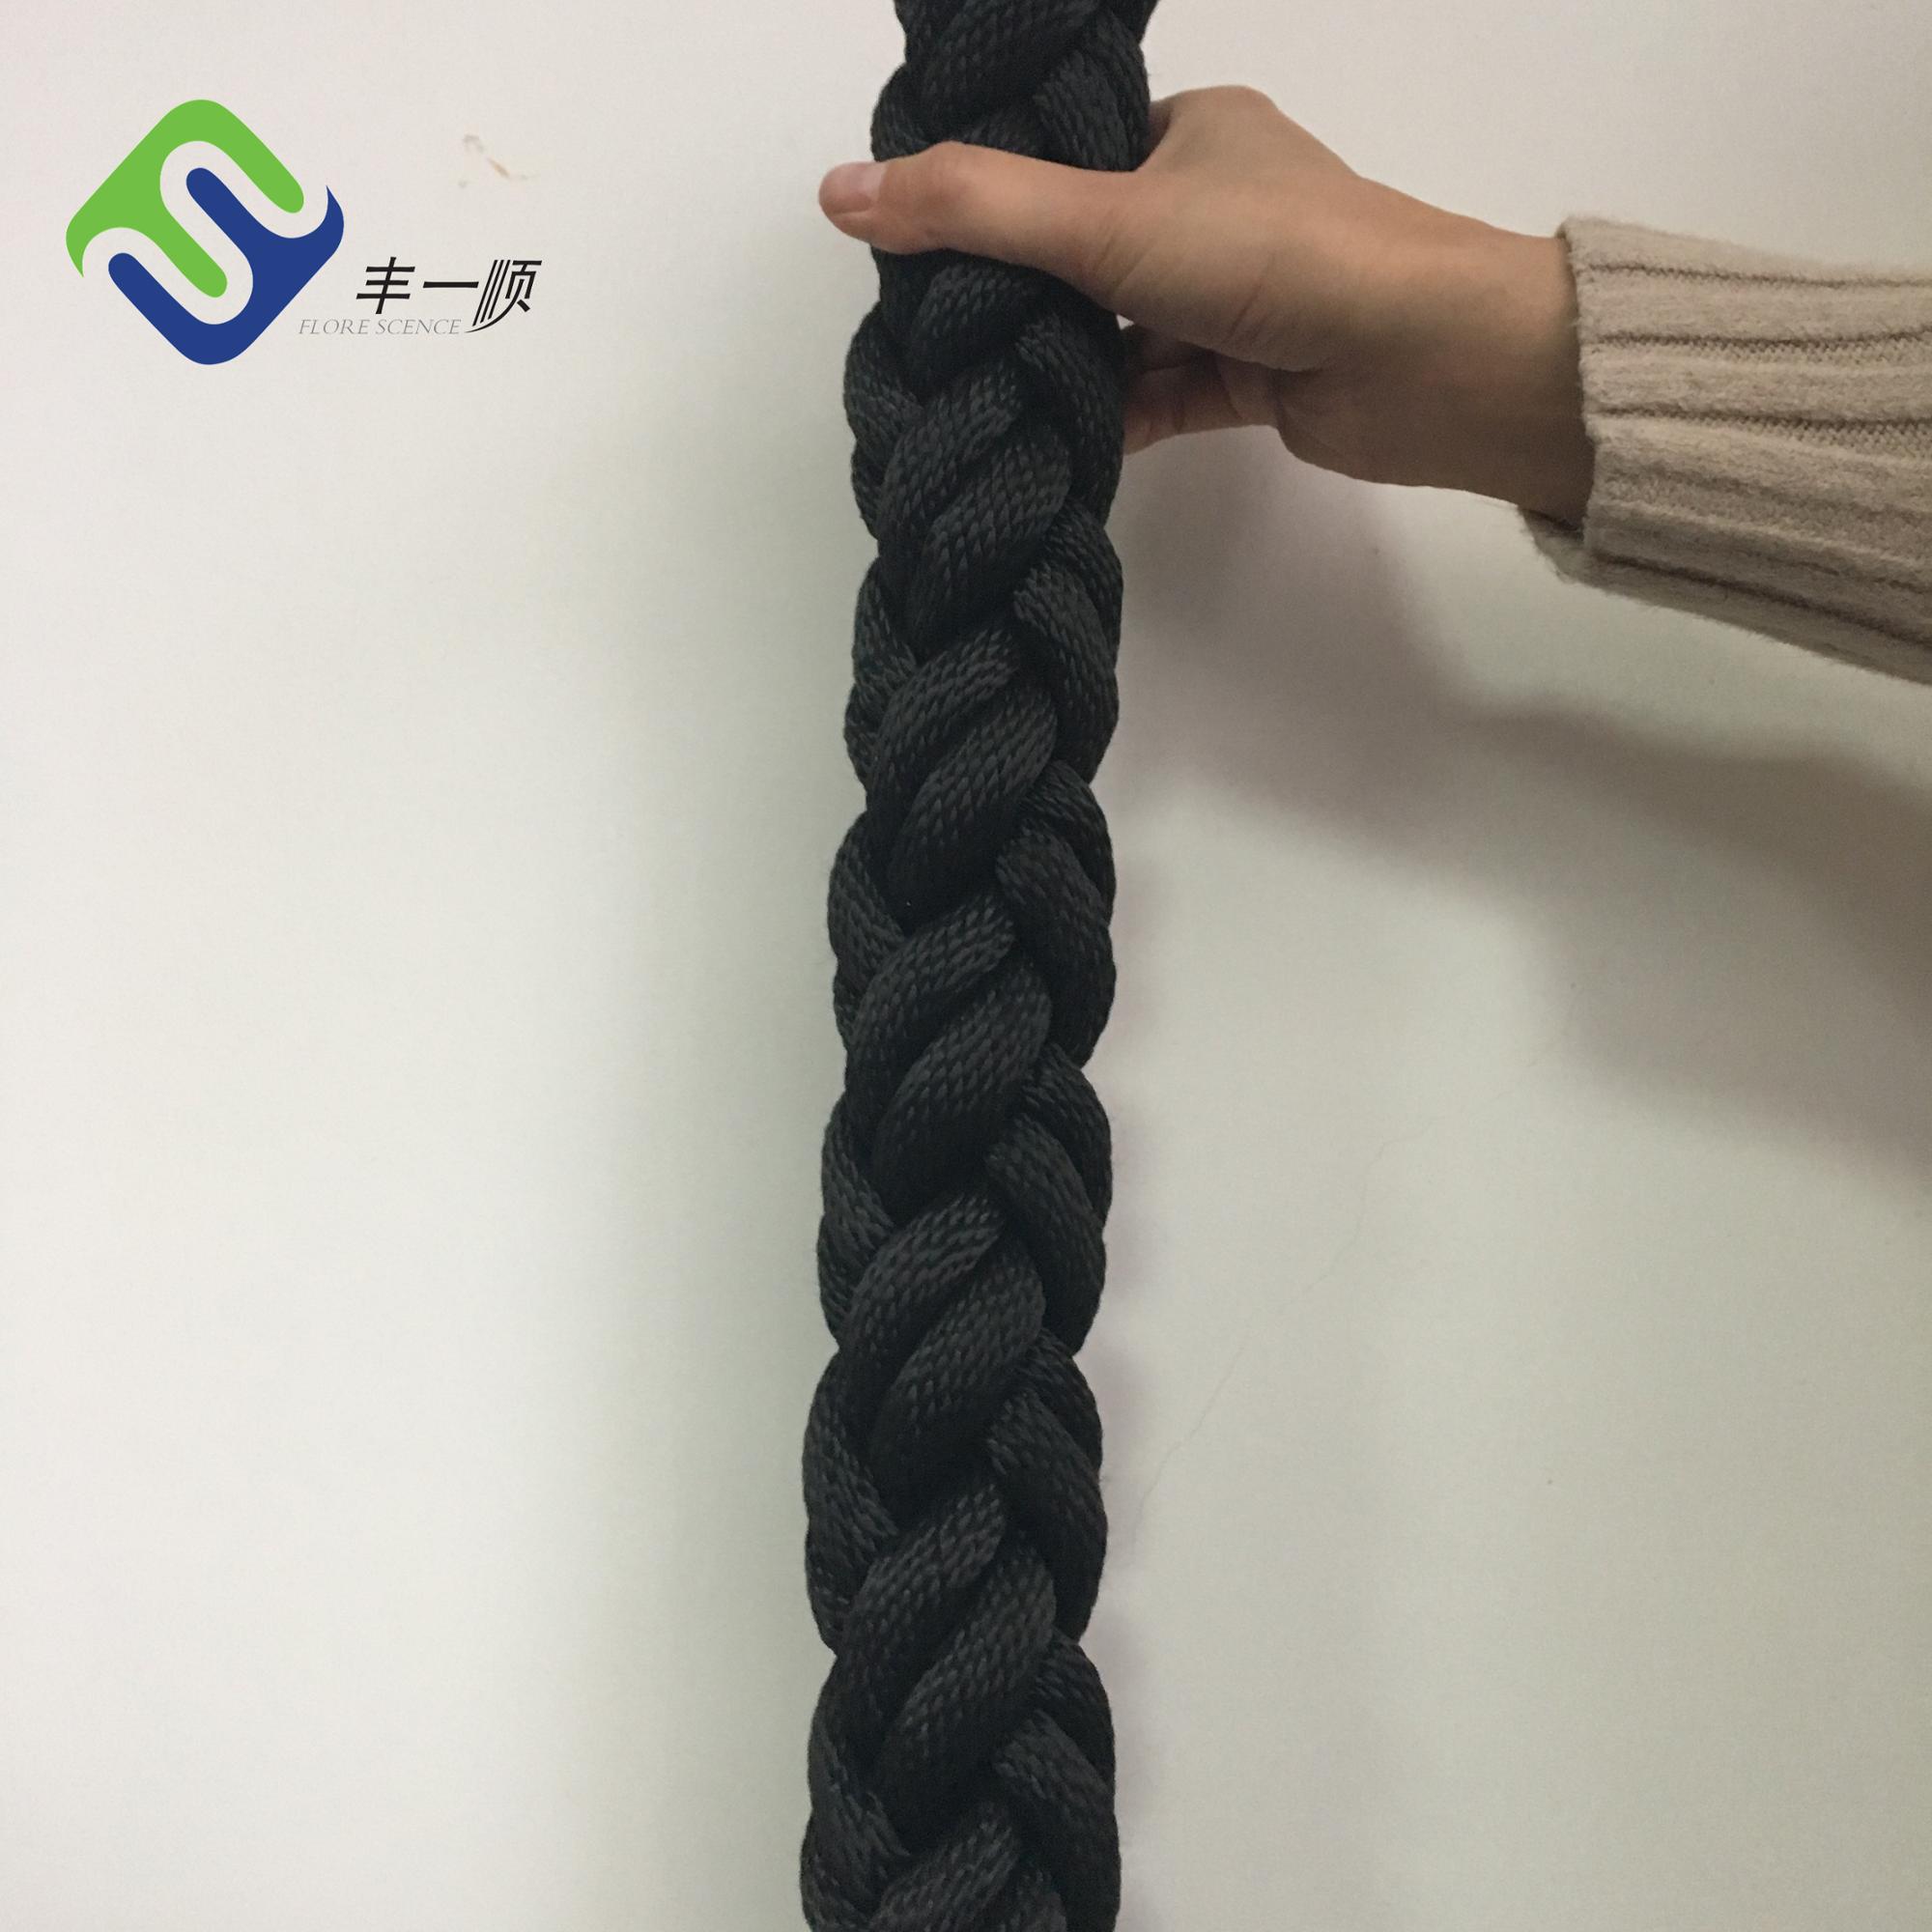 China 8 Strand Braided 28mm-160mm Polyester Marine Rope factory and  manufacturers